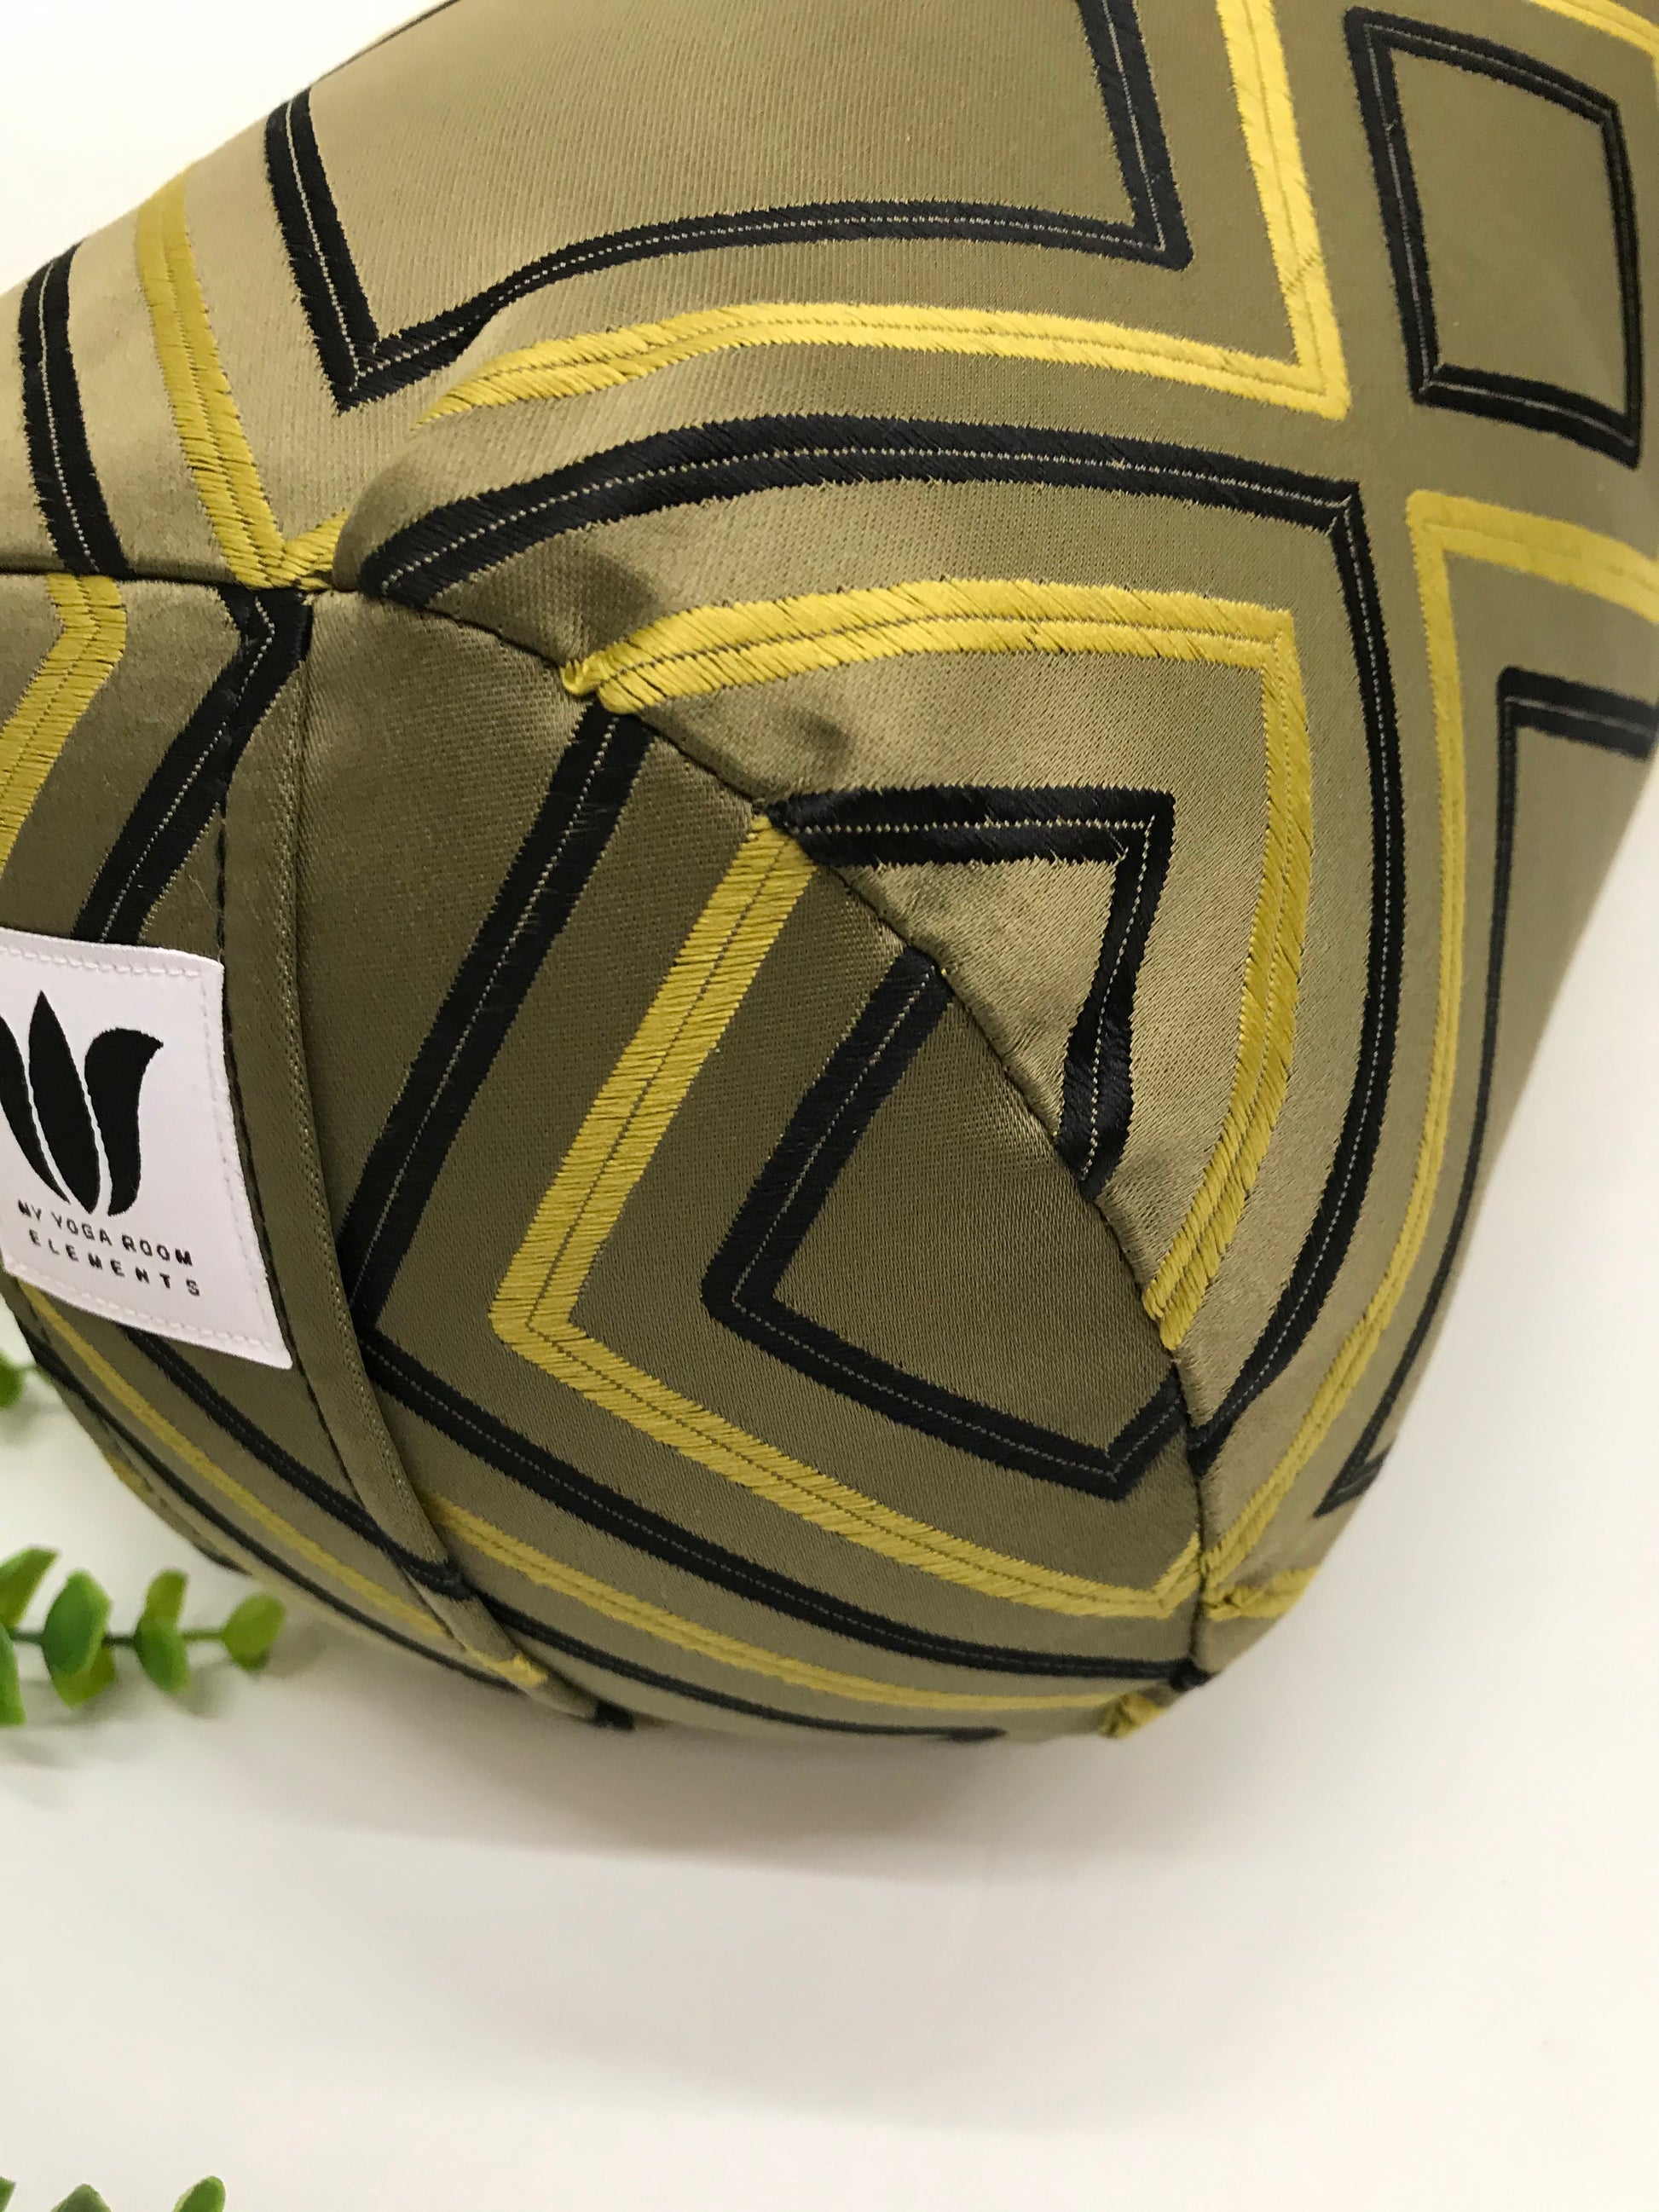 Round yoga bolster in raised embroidered modern diamond print in sage green blue and yellow print fabric. Allergy conscious fill with removeable cover. Made in Canada by My Yoga Room Elements